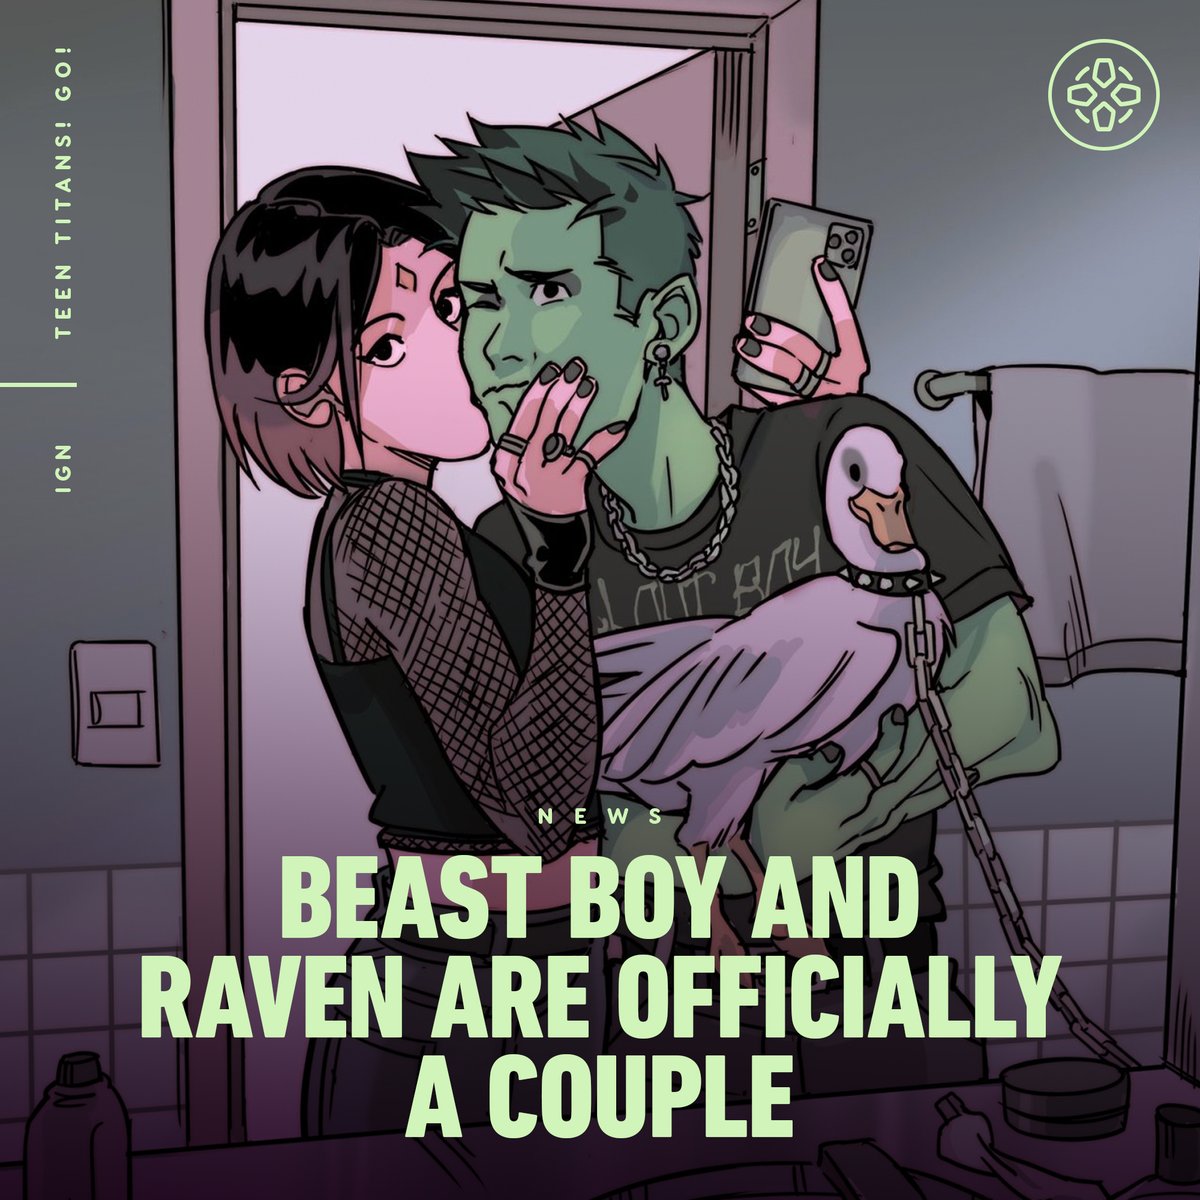 Ign Teen Titans Beast Boy Loves Raven Will Be Arriving Later This Year From Dc Comics Thus Solidifying A Fan Favorite Relationship T Co E73dcogn0z T Co Bfwjlbzgjo